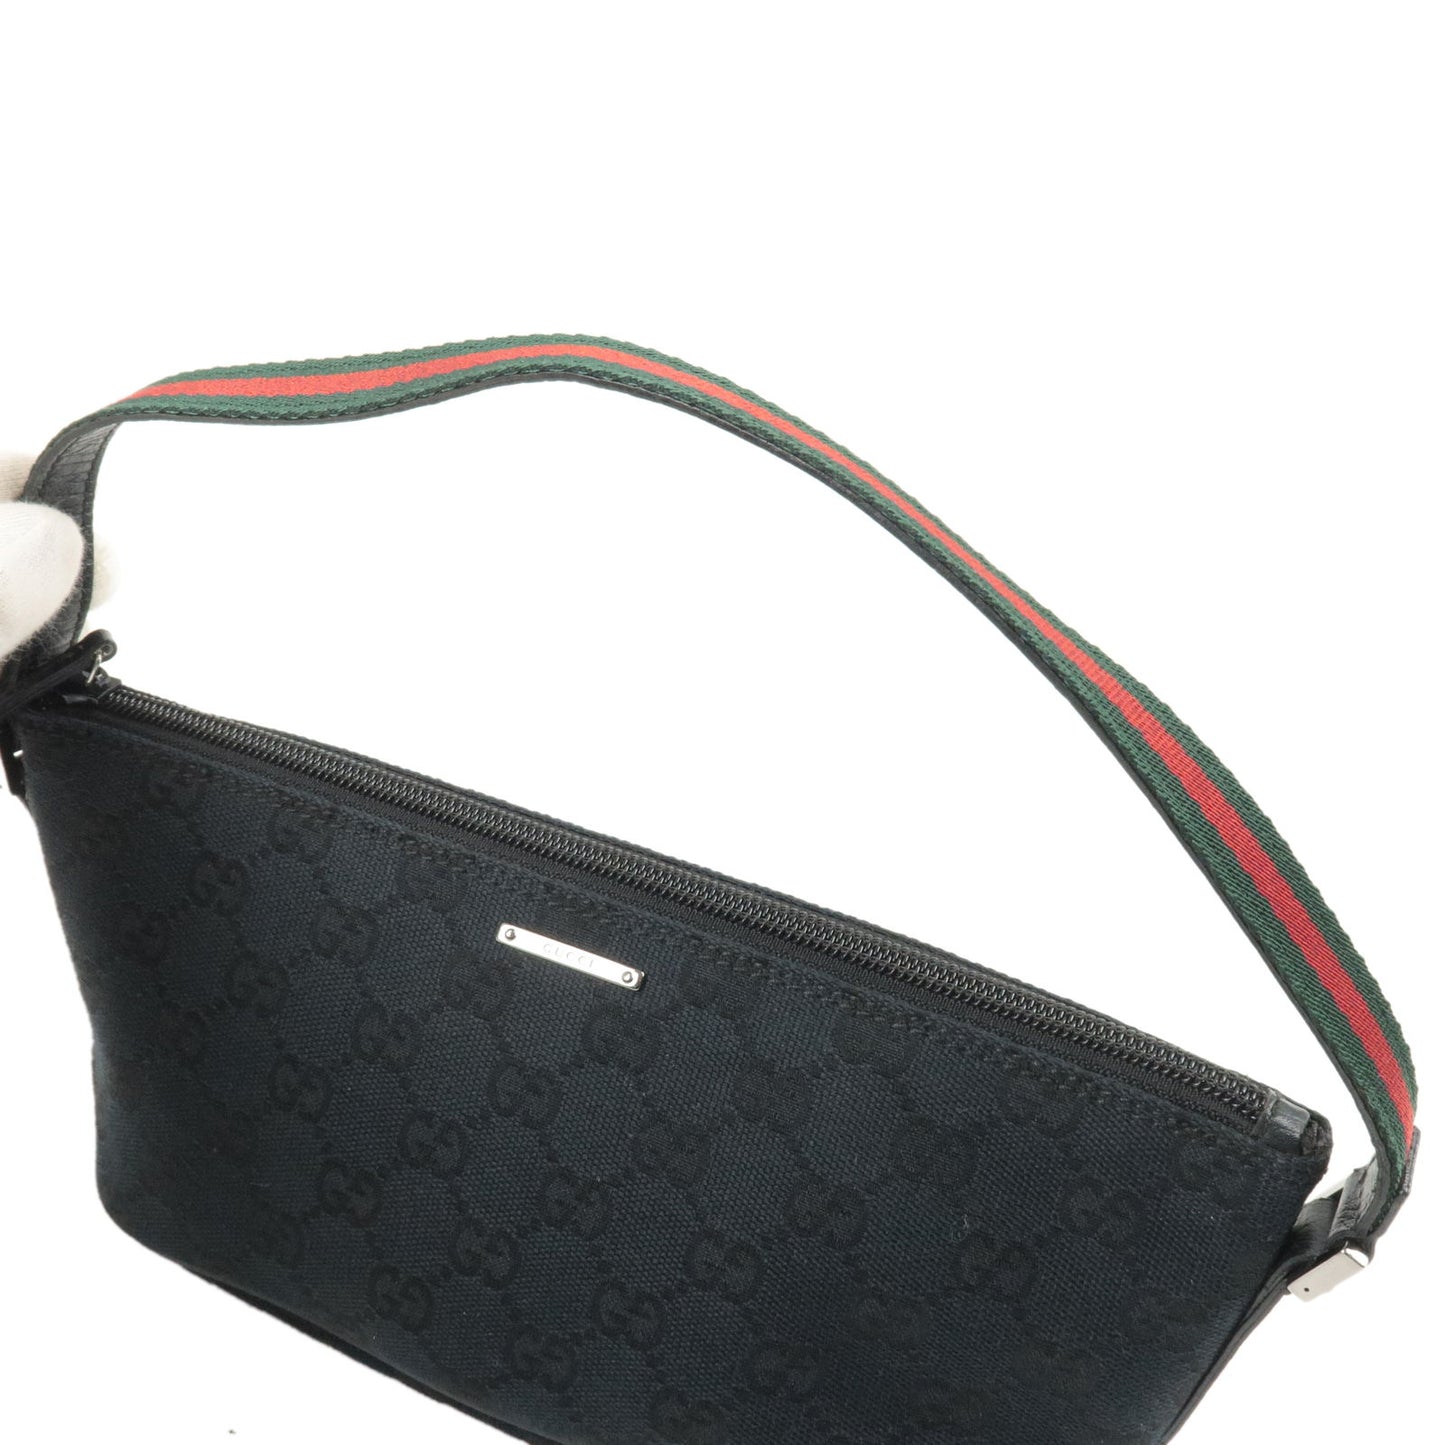 GUCCI Sherry GG Canvas Leather Boat Bag Pouch Black 141809